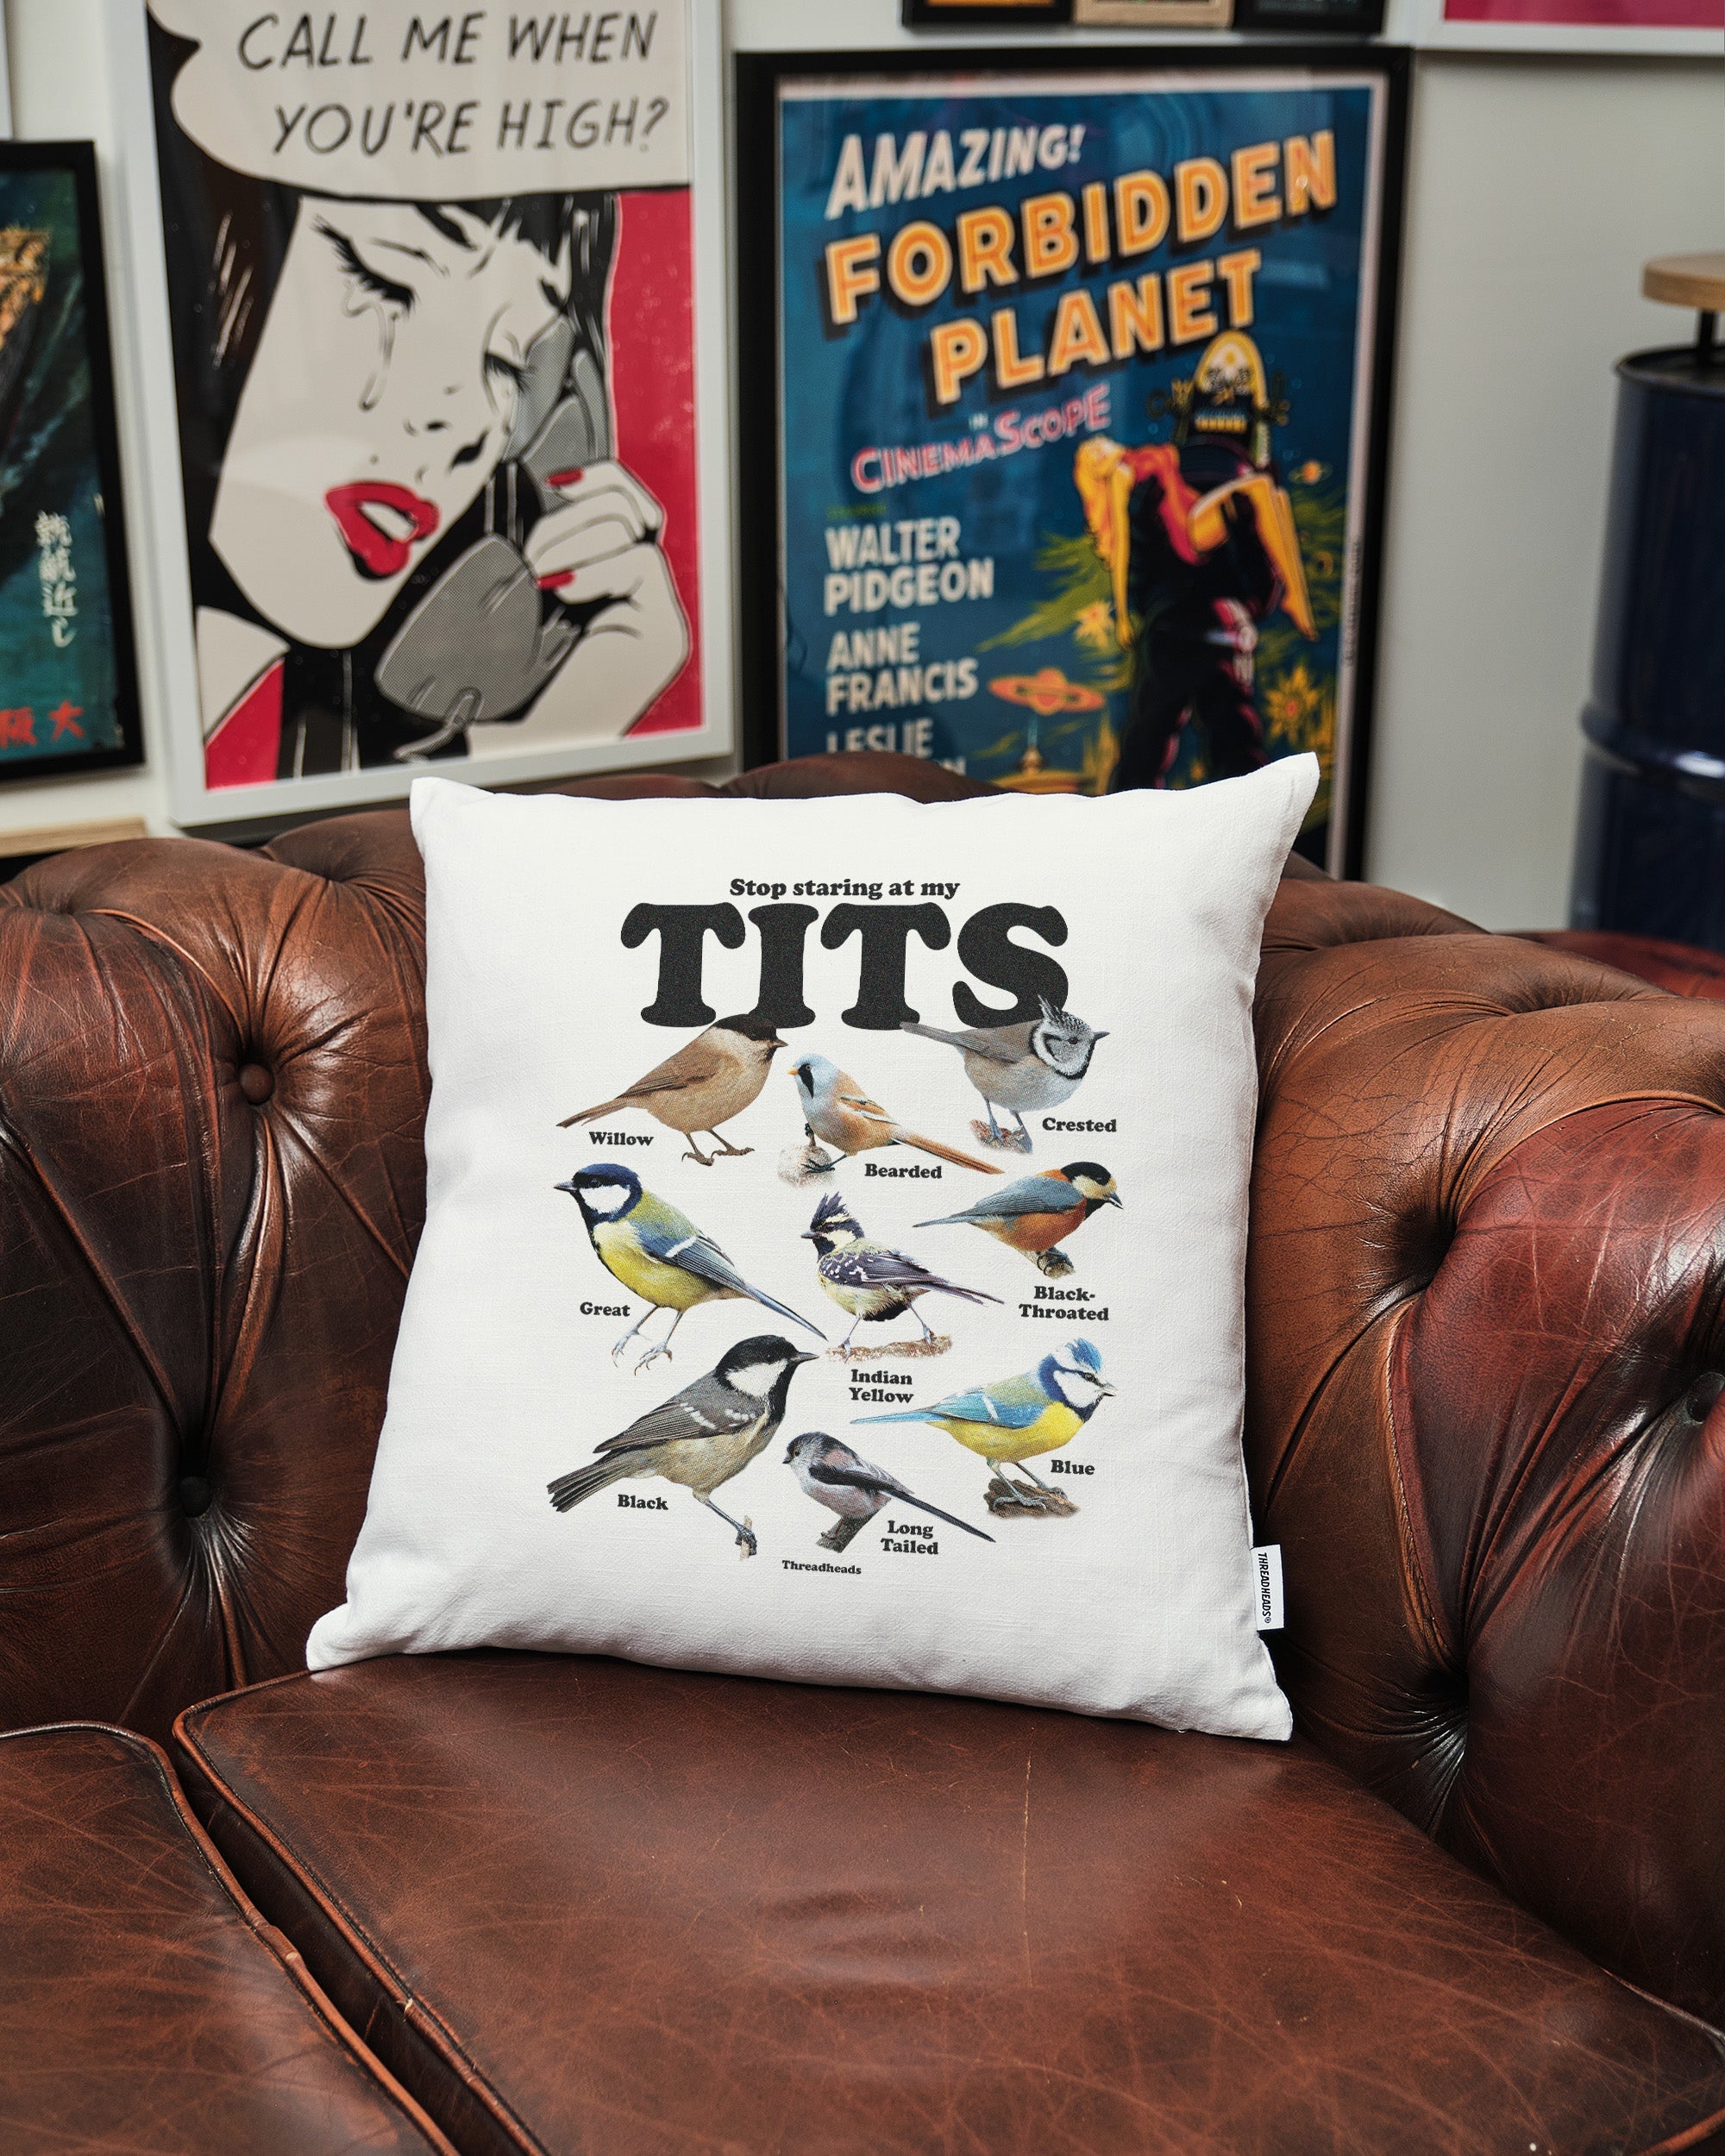 Stop Staring At My Tits Cushion Australia Online White